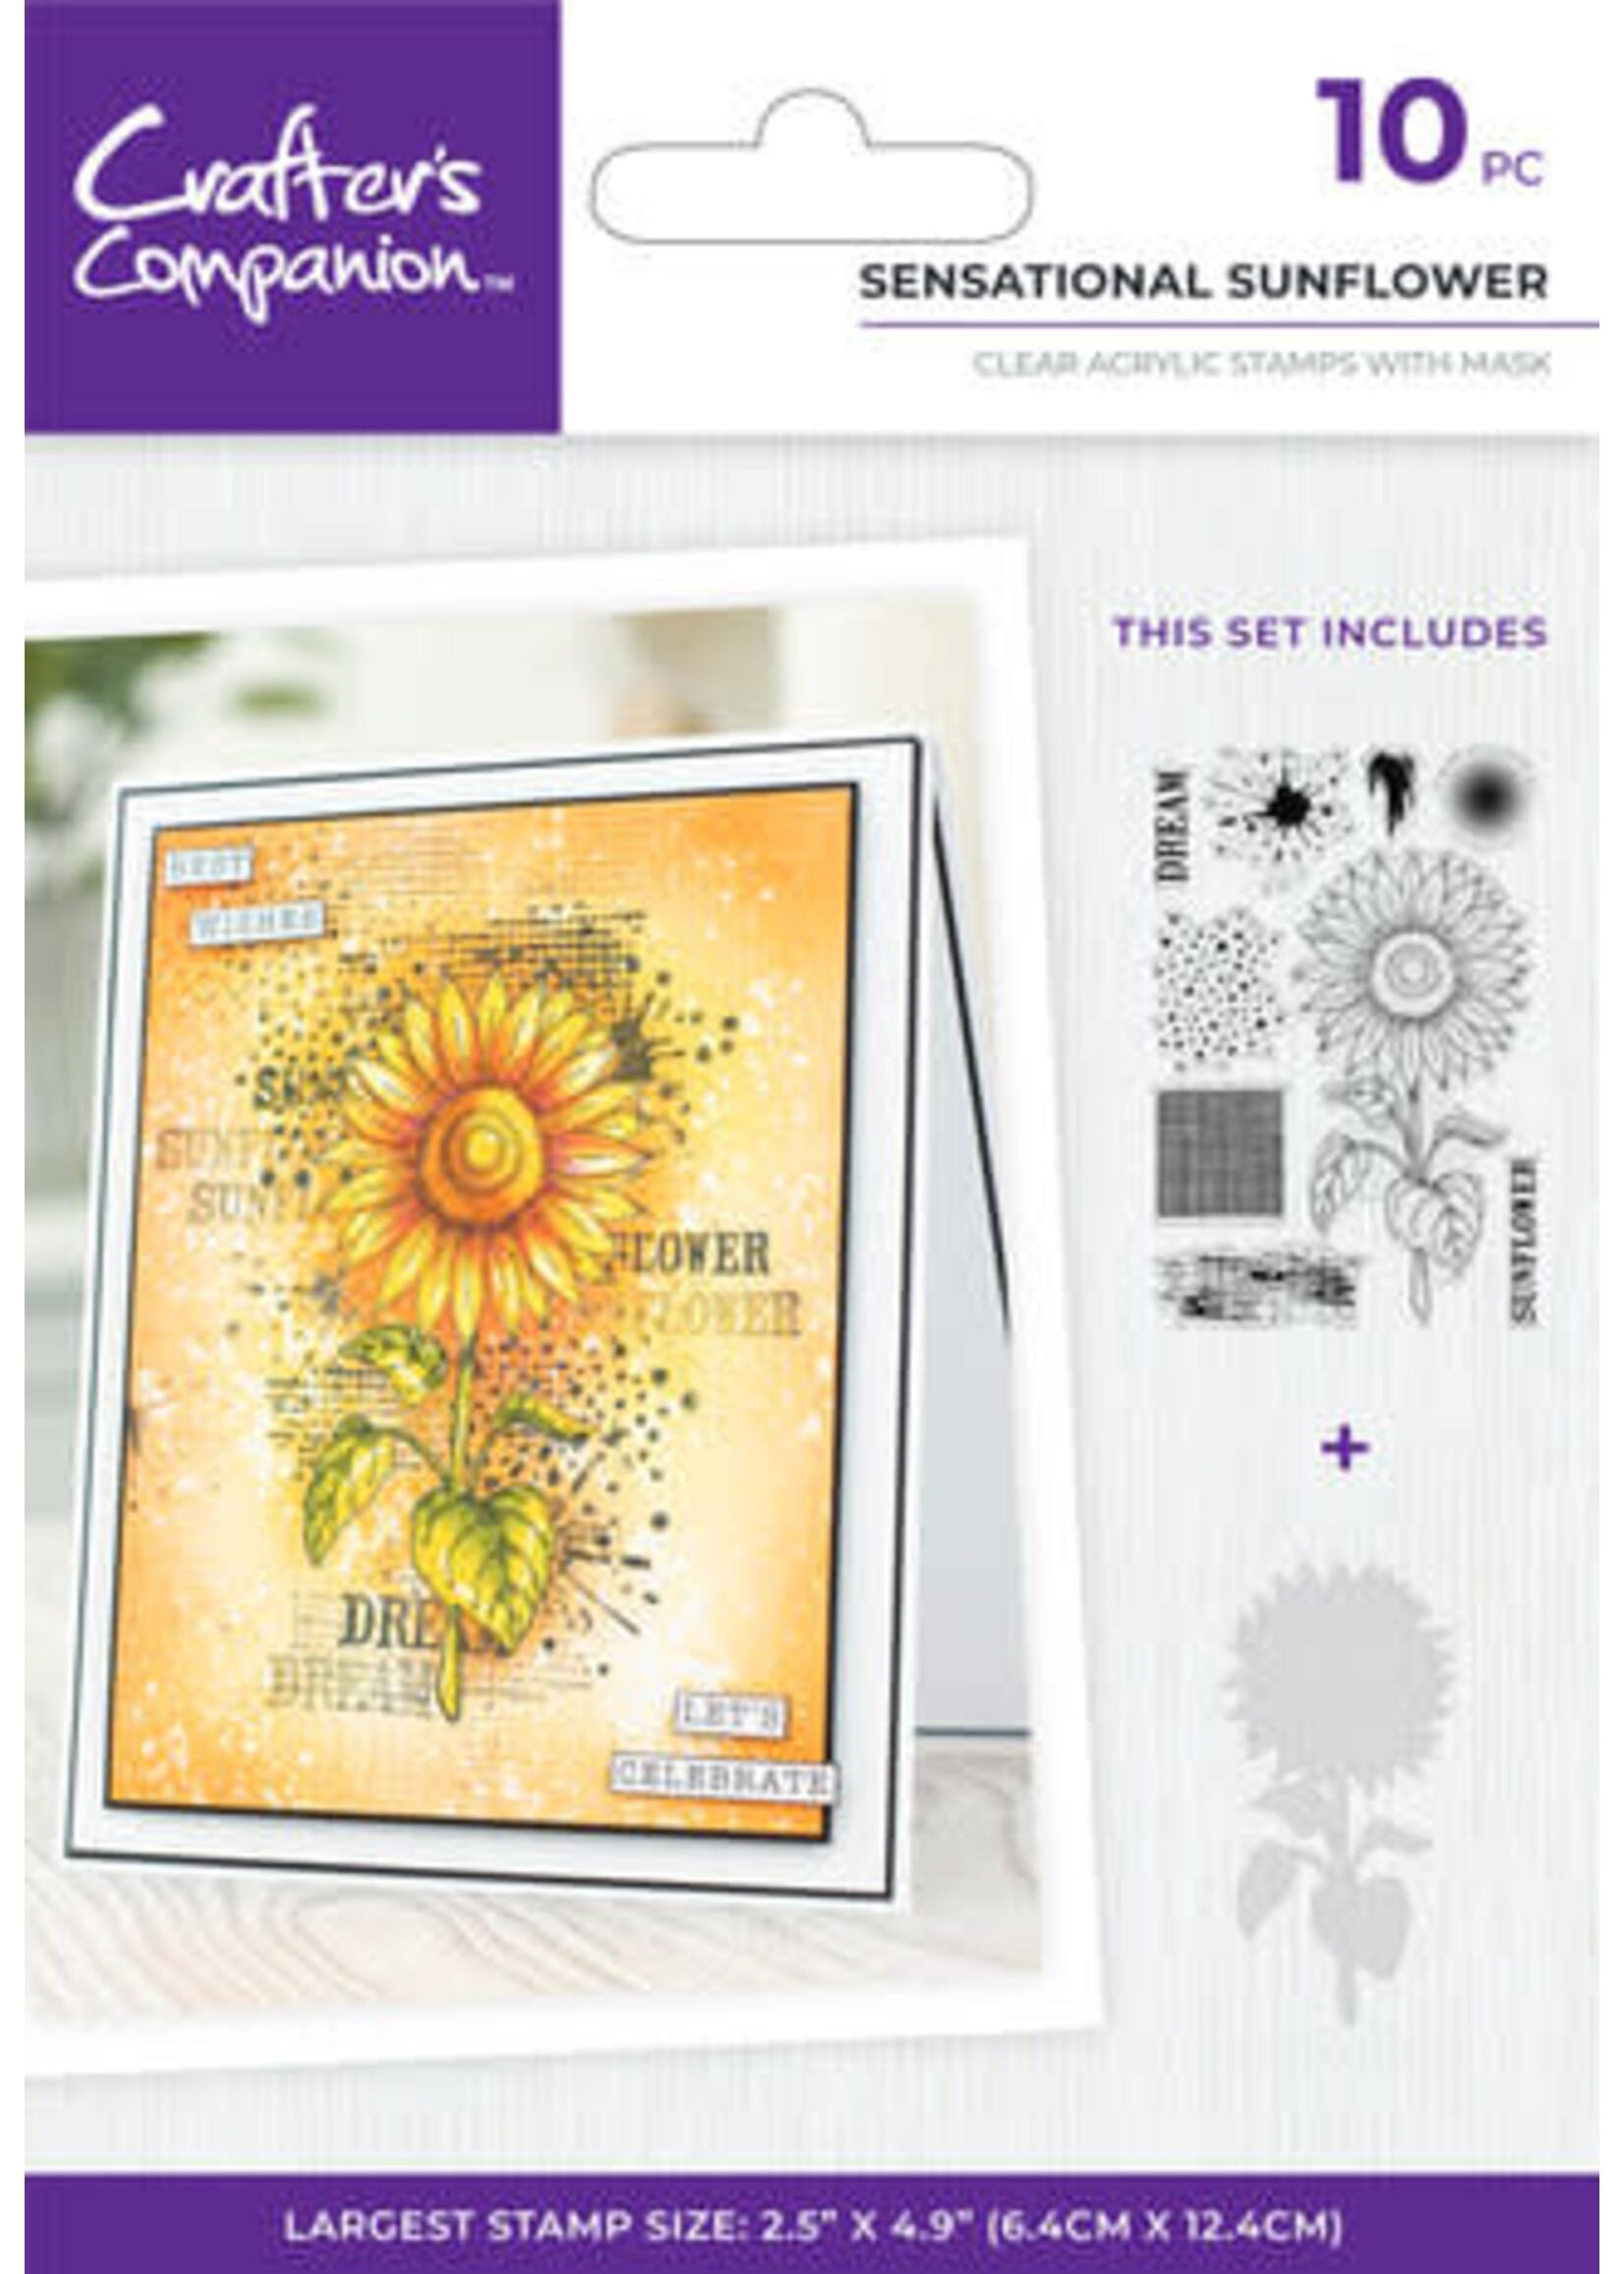 Crafters Companion Floral Collage Clear Stamp w/ Mask 4x6 Inch Sensational Sunflower (CC-CA-ST-SENSUN)